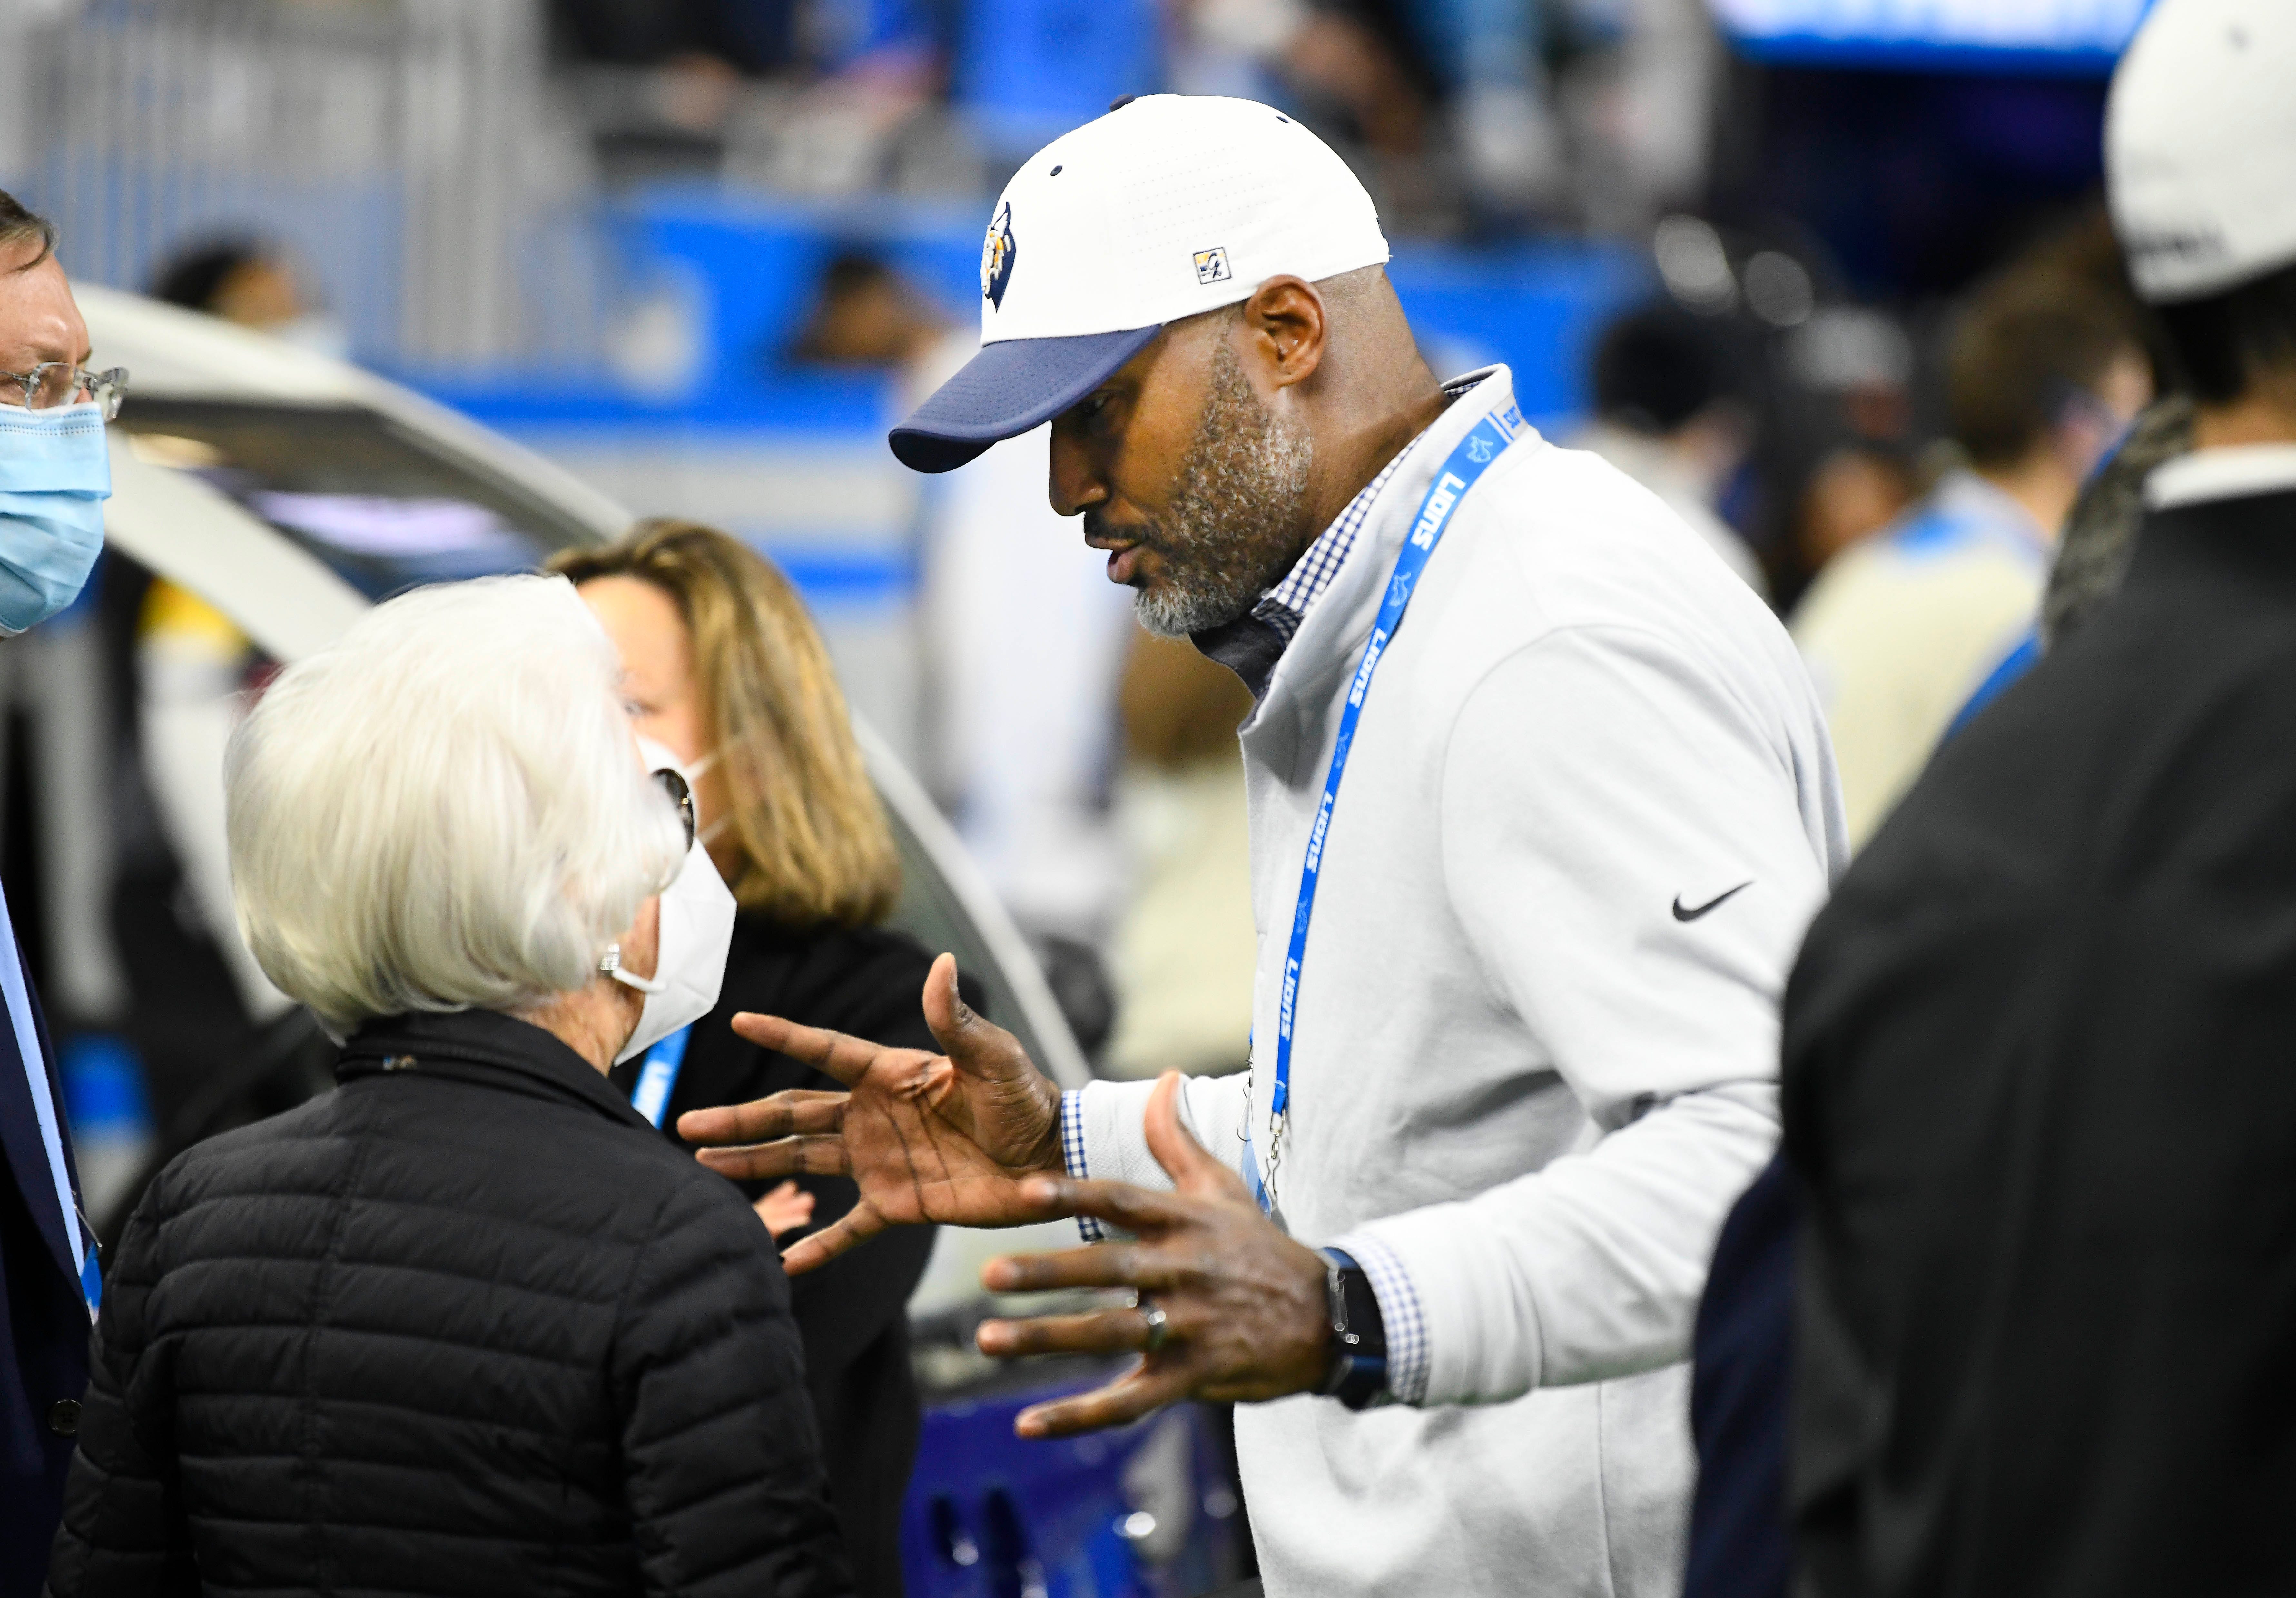 Lions owner Martha Ford talks with Lions Executive Vice President and GM talk during warmups.